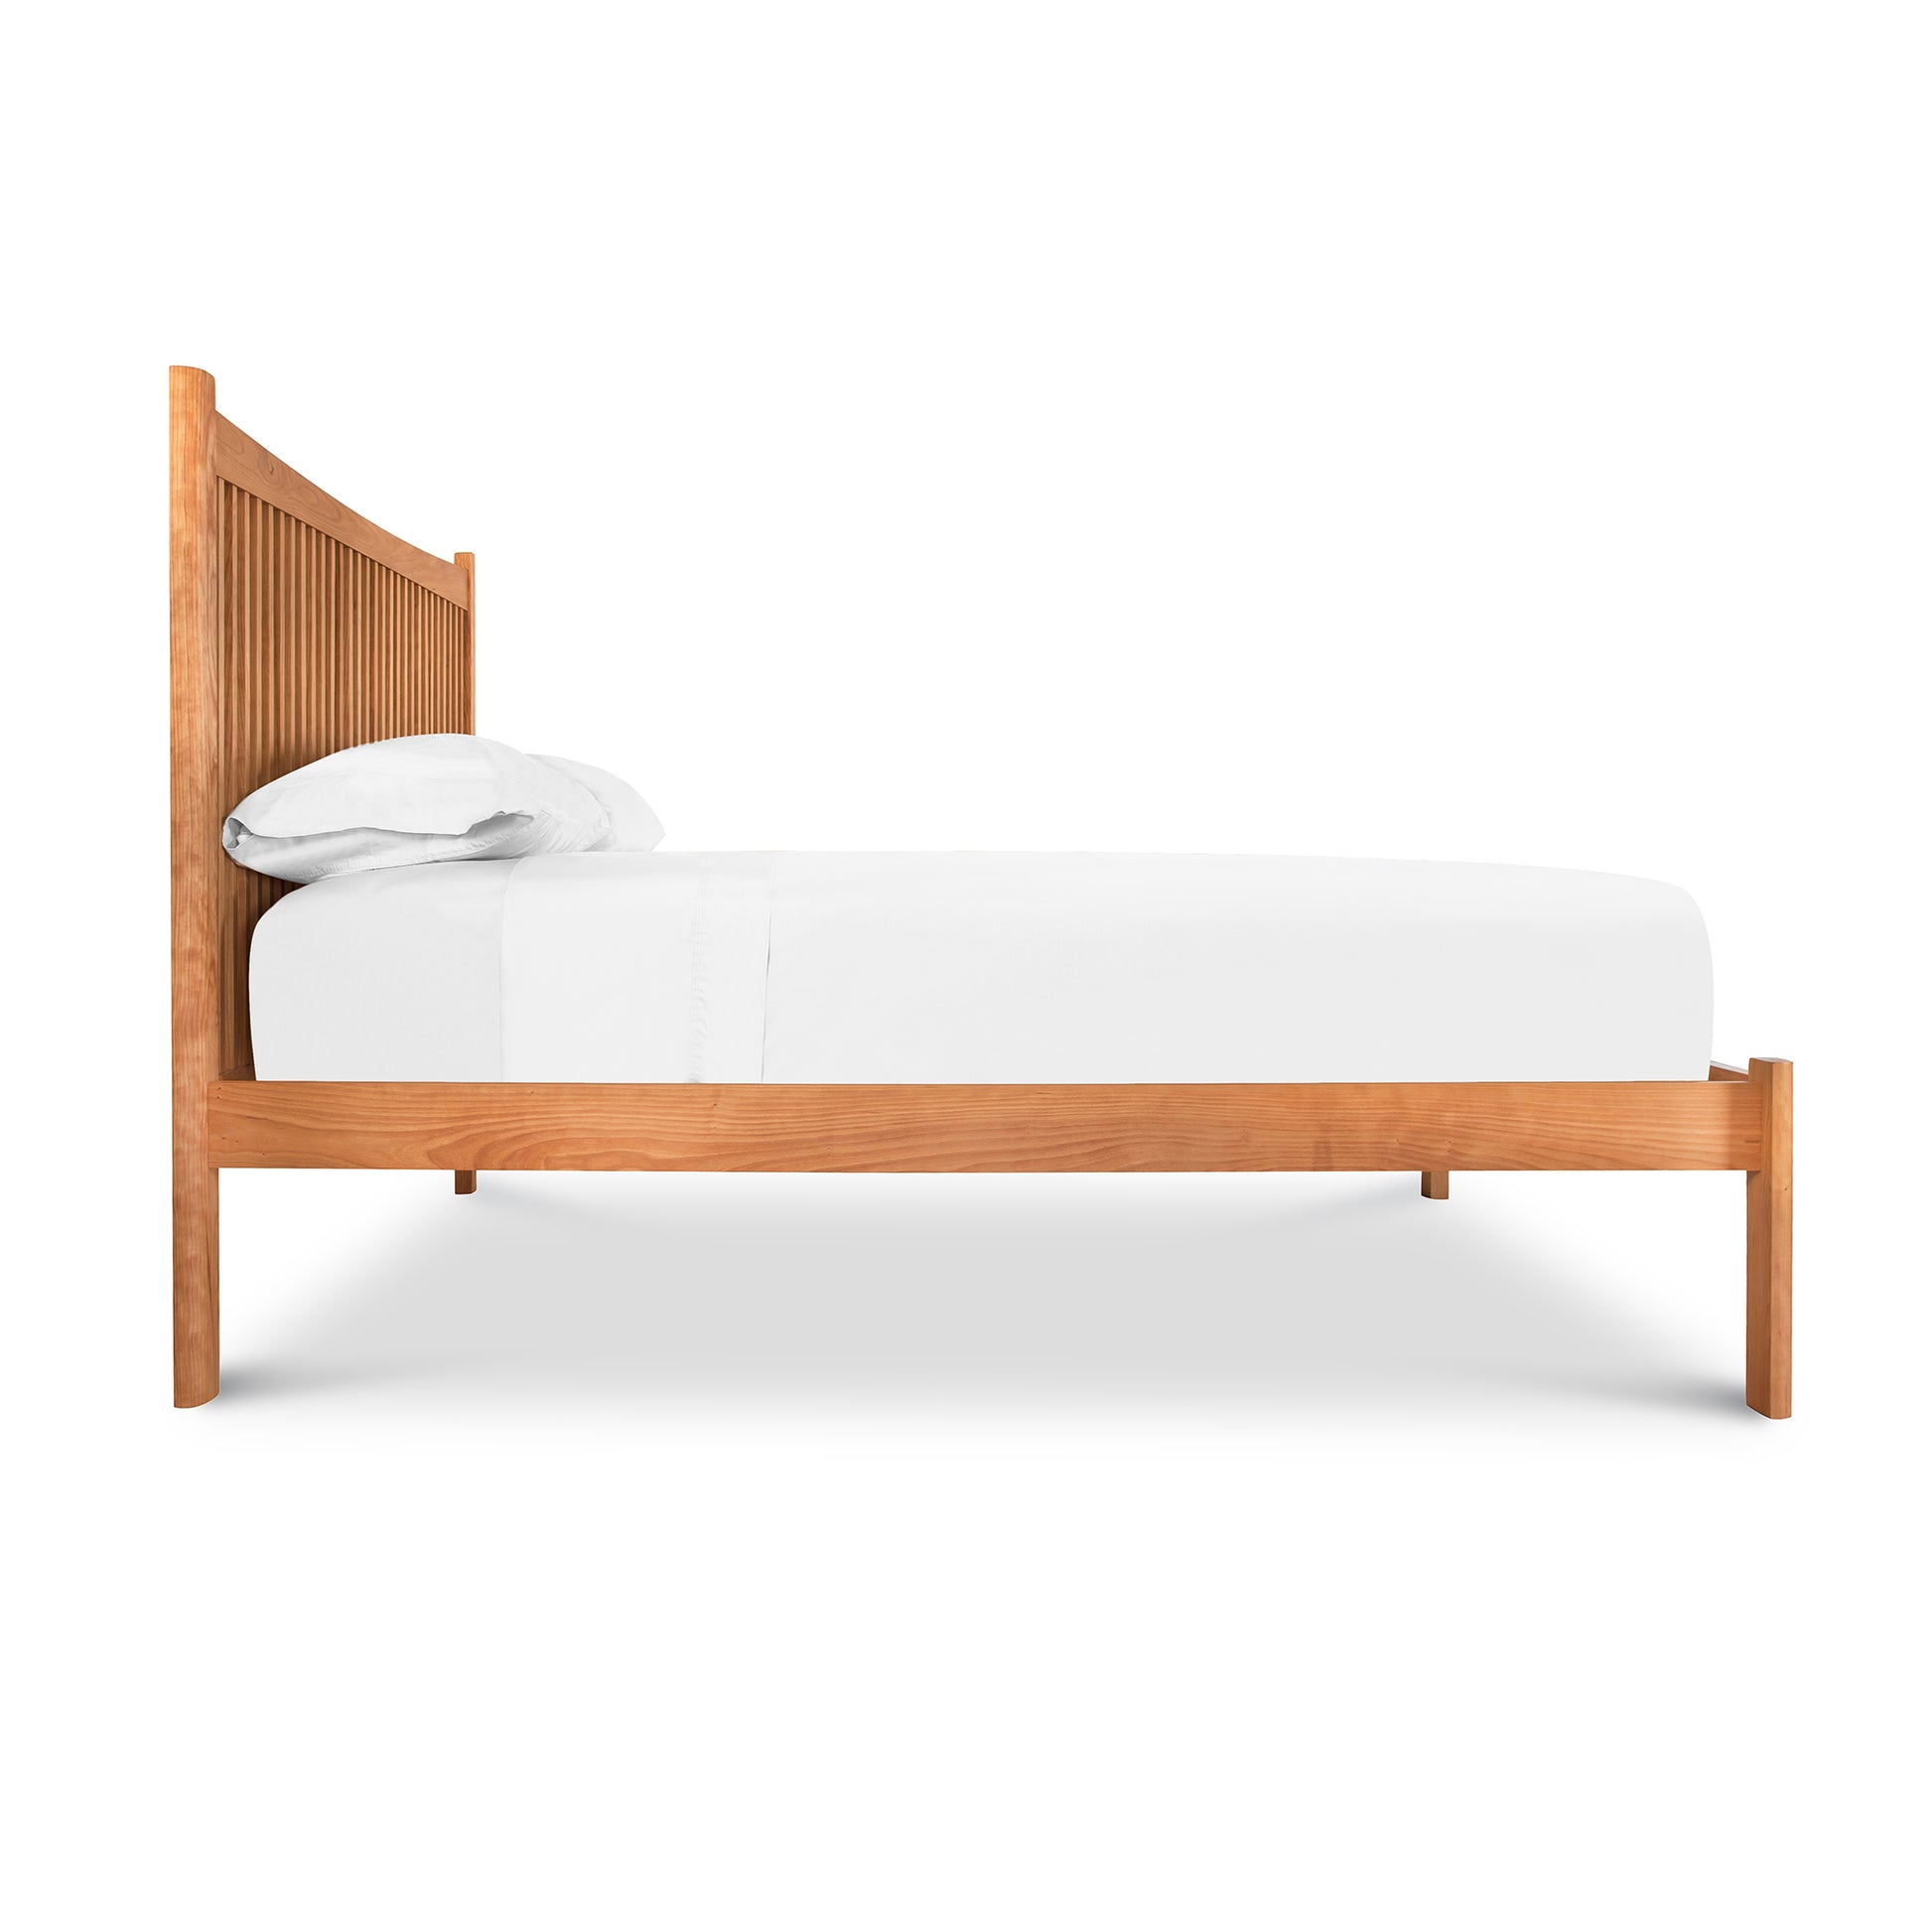 The Heartwood Shaker Low Footboard Platform Bed beautifully combines Arts and Crafts styling with the elegance of Vermont handcrafted furniture. Made from solid wood, the Heartwood Shaker Low Footboard Bed by Vermont Furniture Designs features a minimalist design perfect for any bedroom.